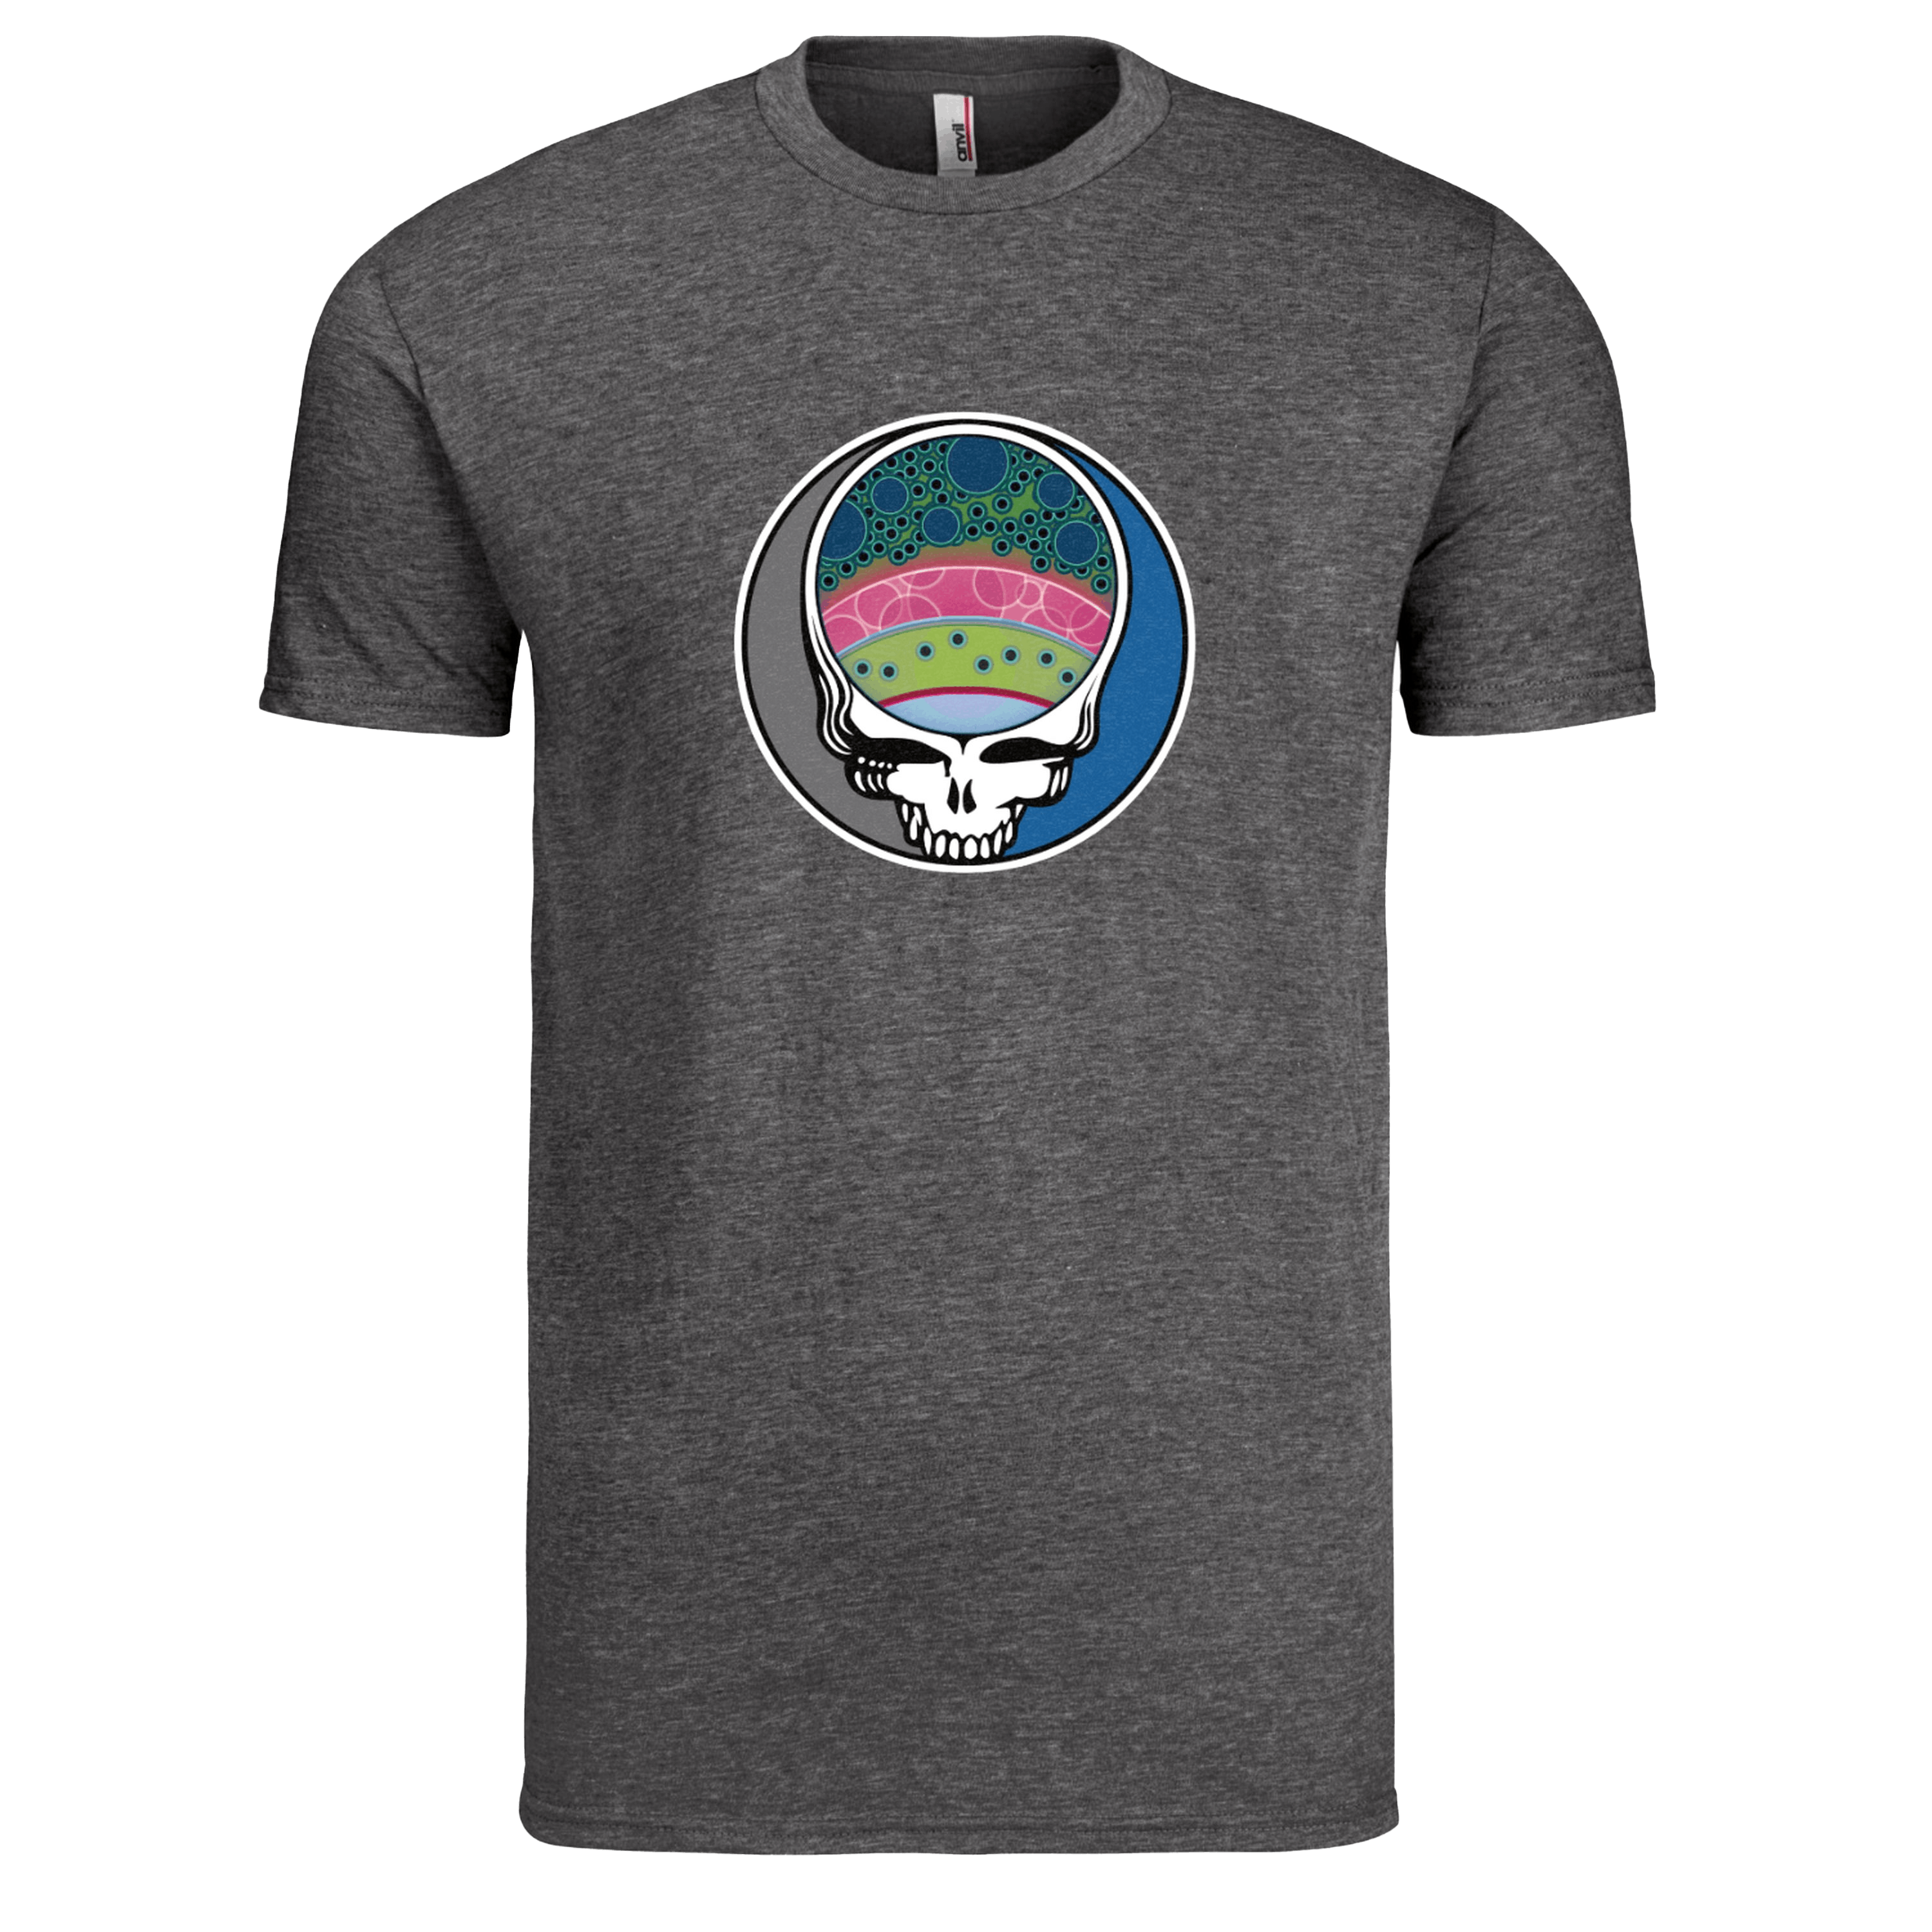 https://flyslaps.com/wp-content/uploads/2020/07/Fly-Slaps-Steal-Your-Face-Rainbow-Trout-TShirt.png